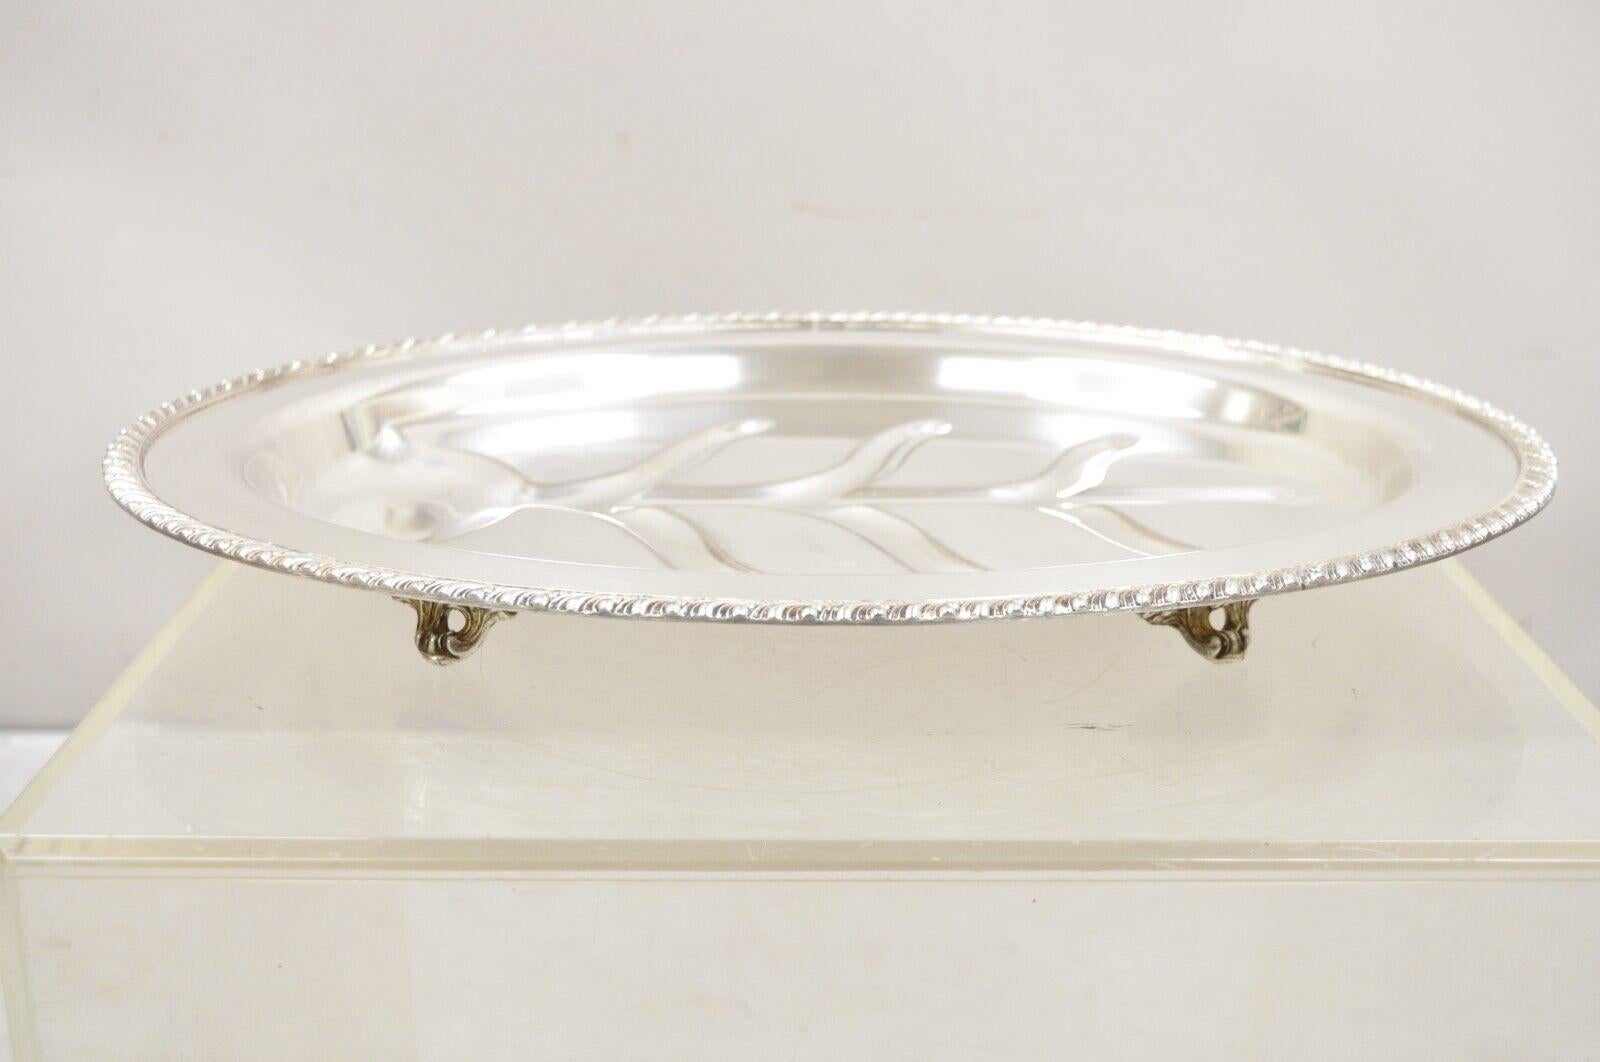 Vintage English Regency Style Silver Plate Oval Meat Cutlery Serving Platter Tray Dish. Circa Mid 20th Century. Measurements:  2